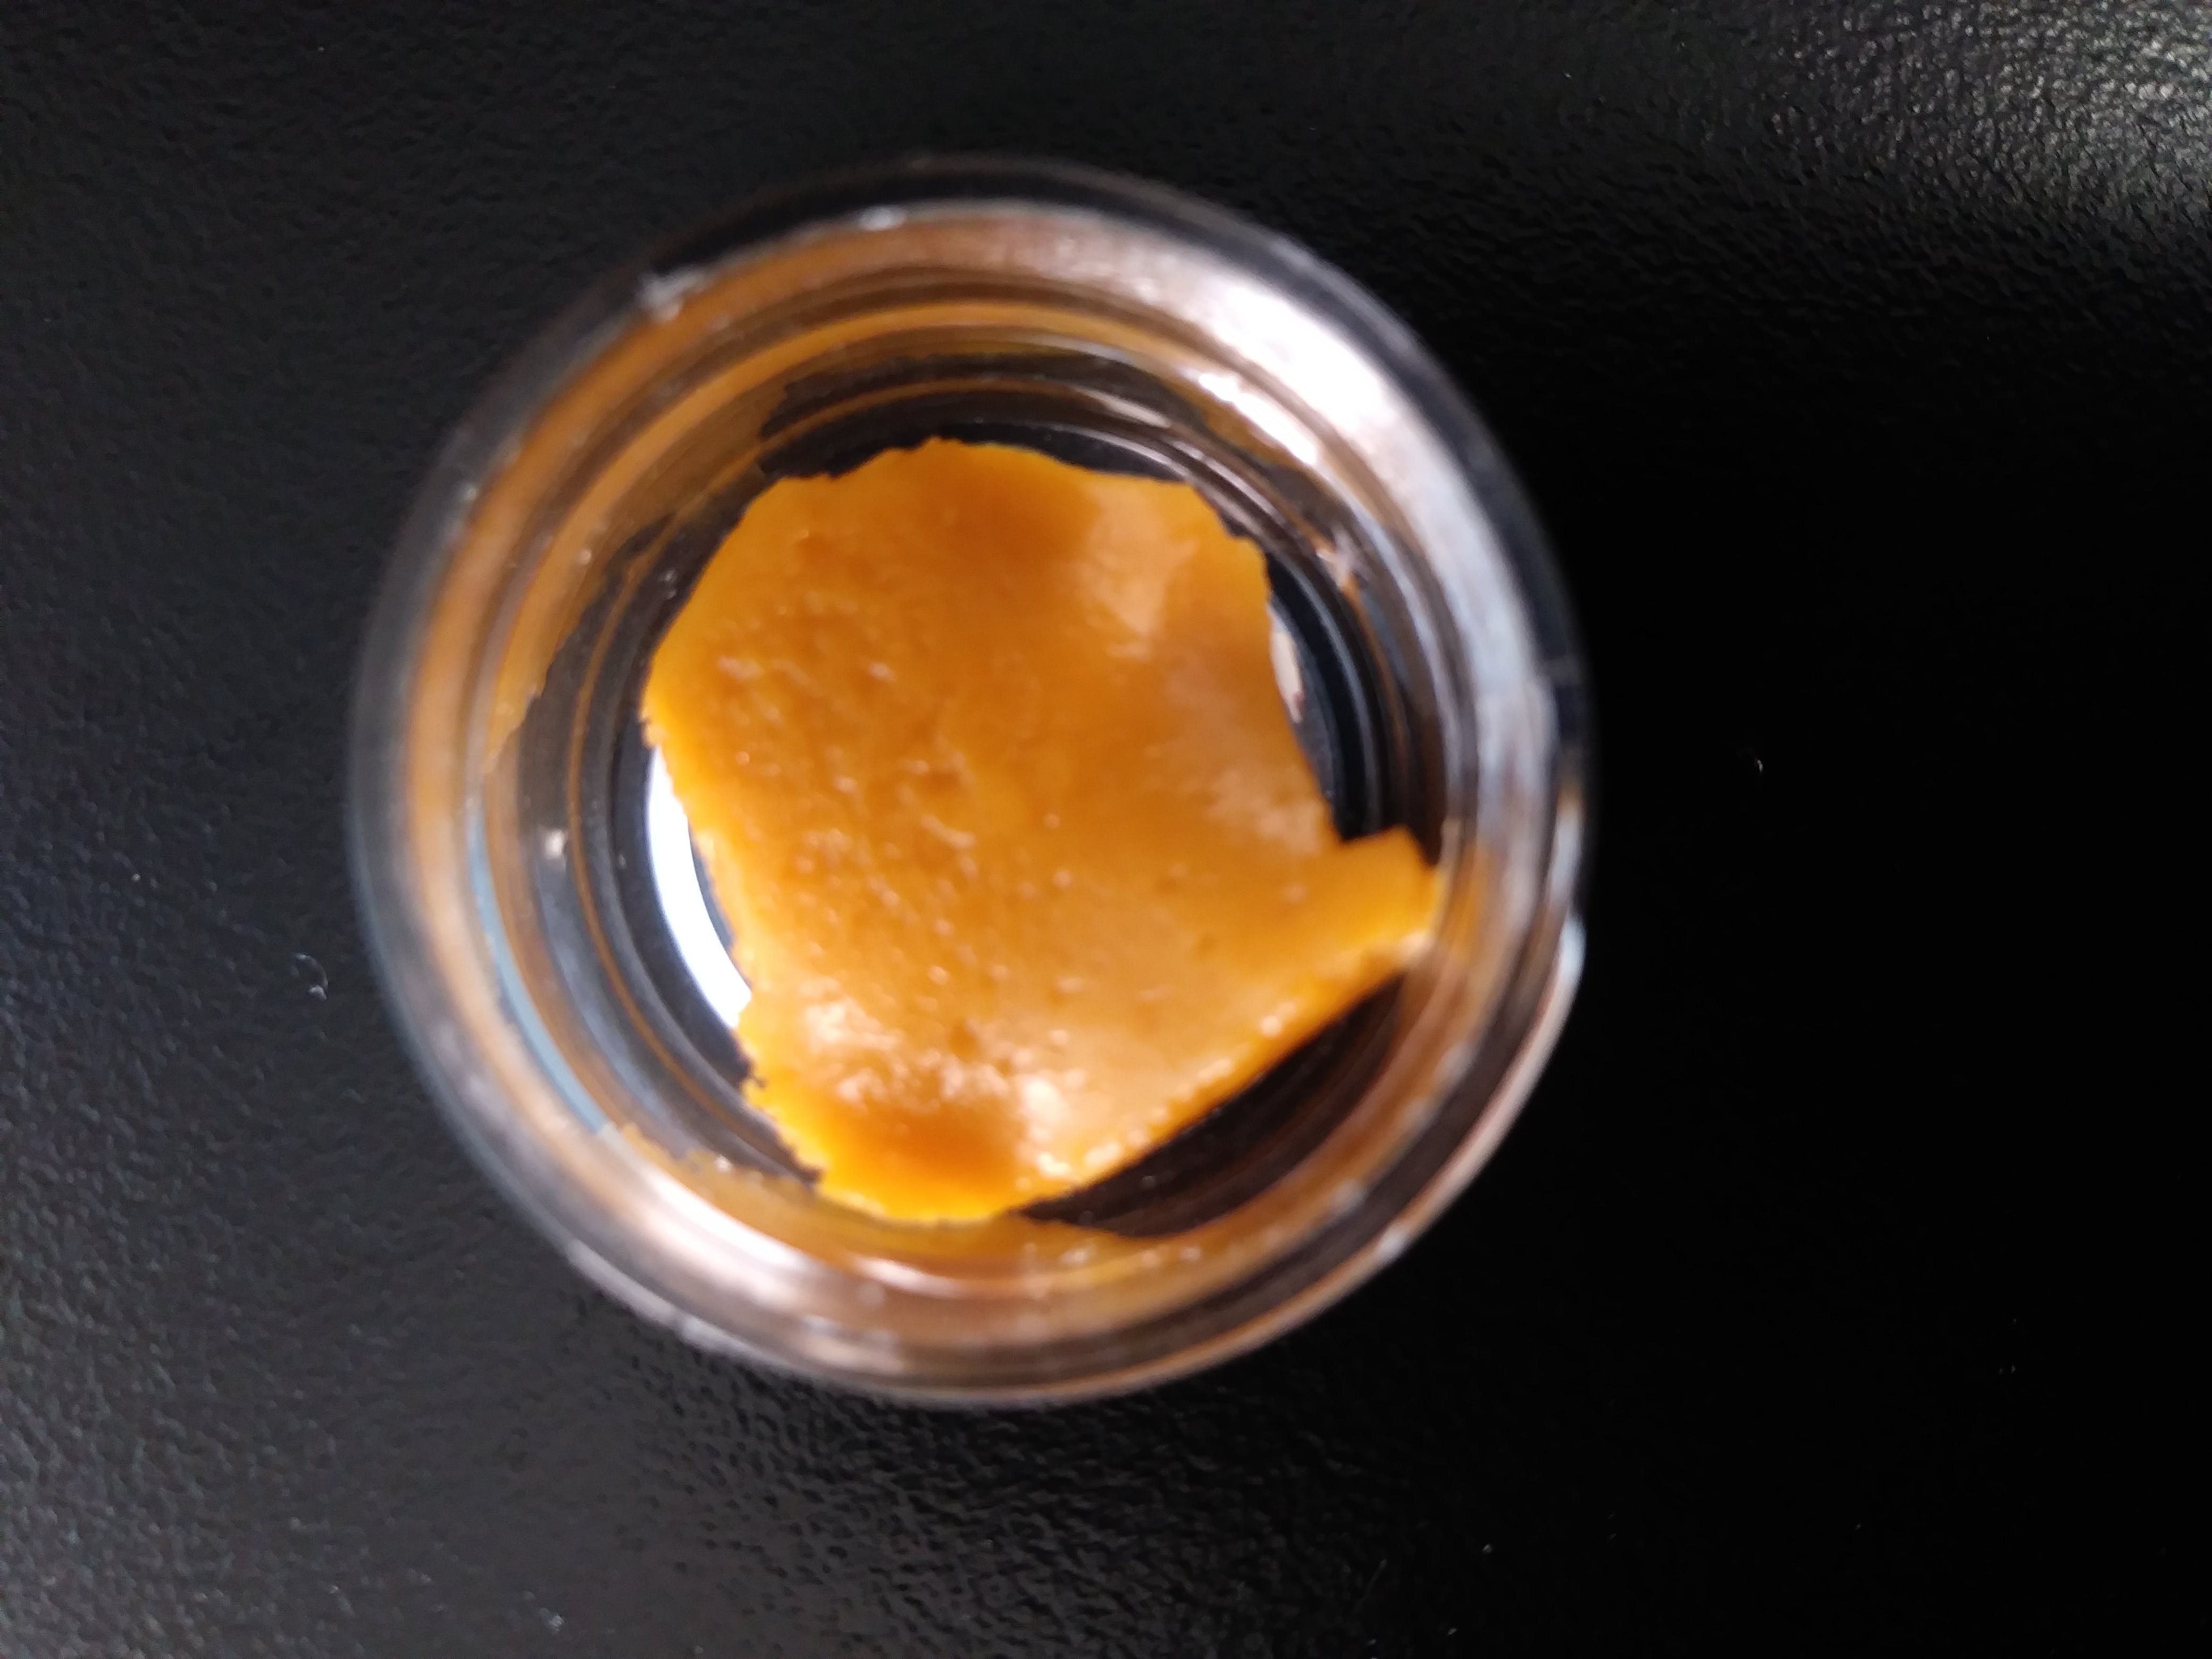 concentrate-the-doctors-pho-wax-by-craft-multiple-strains-available